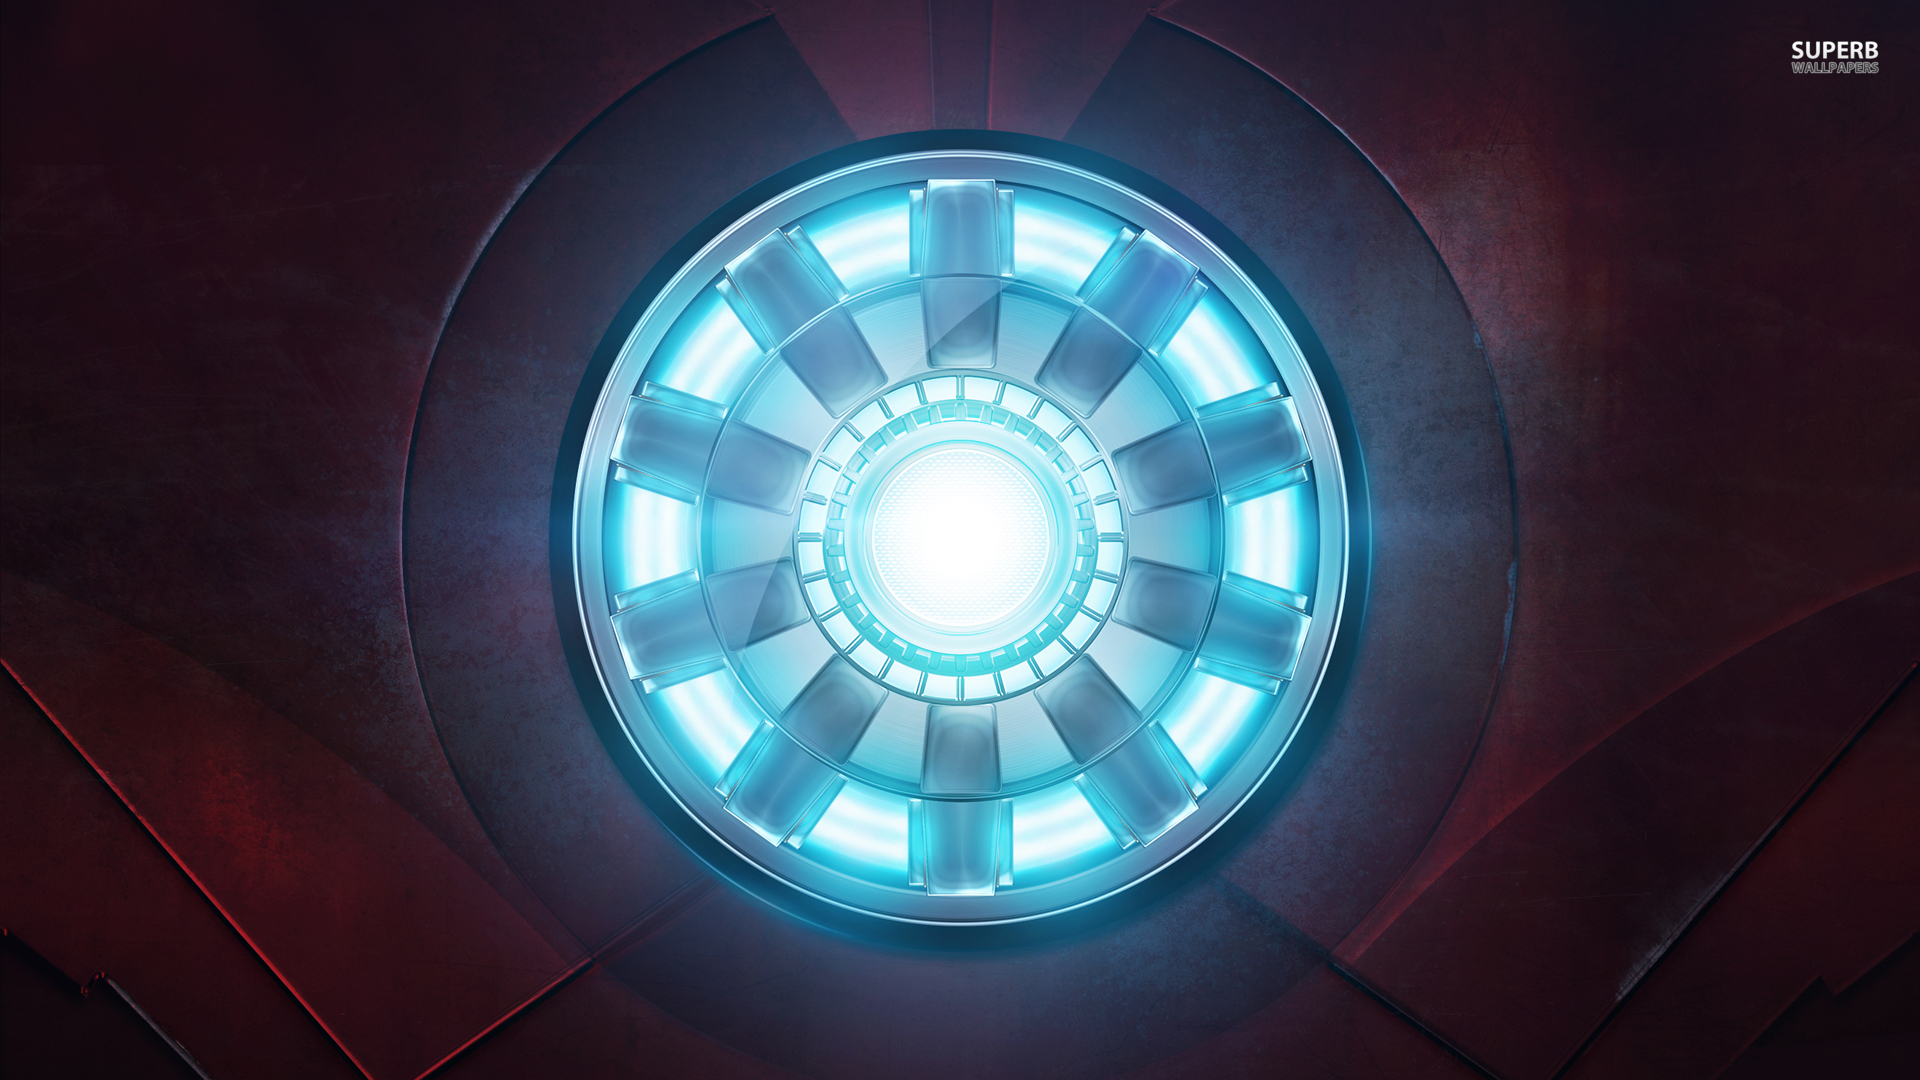 Iron Man Arc Reactor Marvel Hd Wallpaper Movies And Tv.